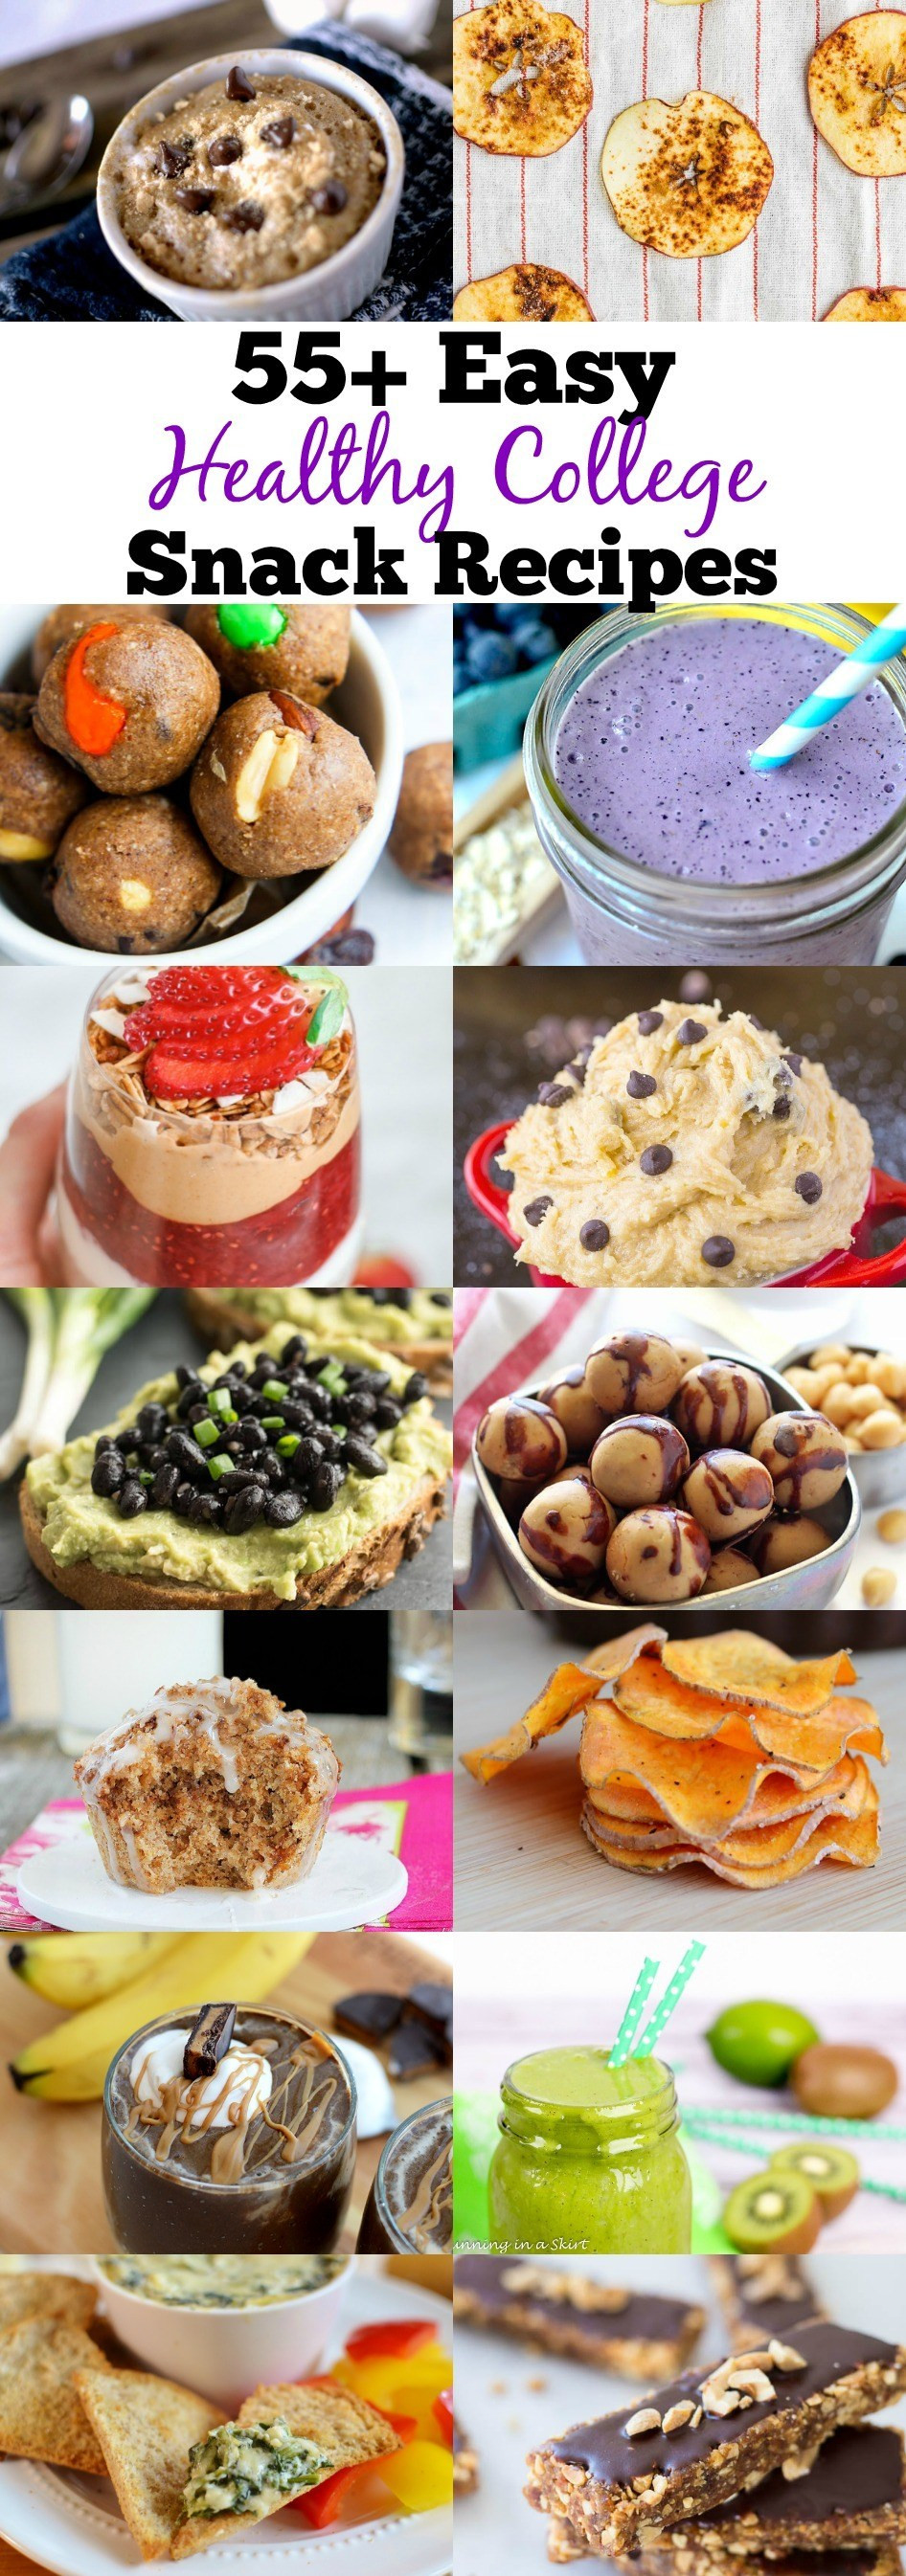 Healthy College Snacks
 55 Healthy College Snack Recipes That Can Be Made In a